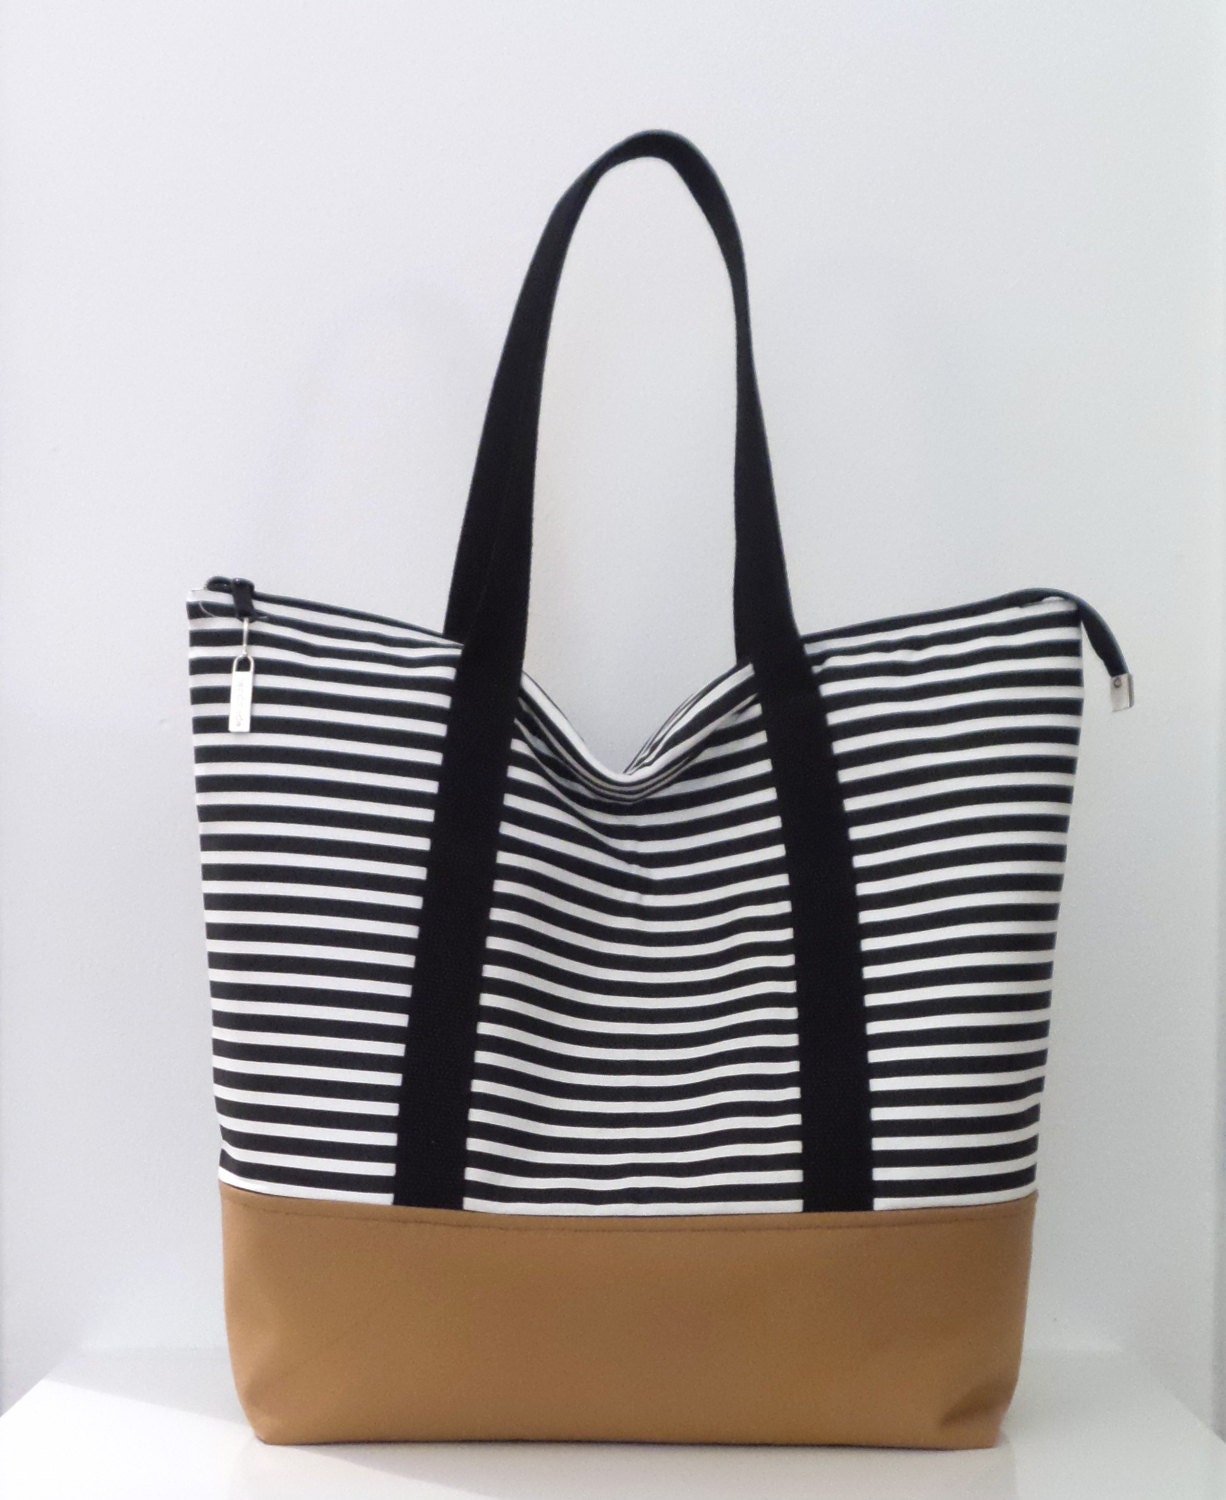 Large tote bag with zipper